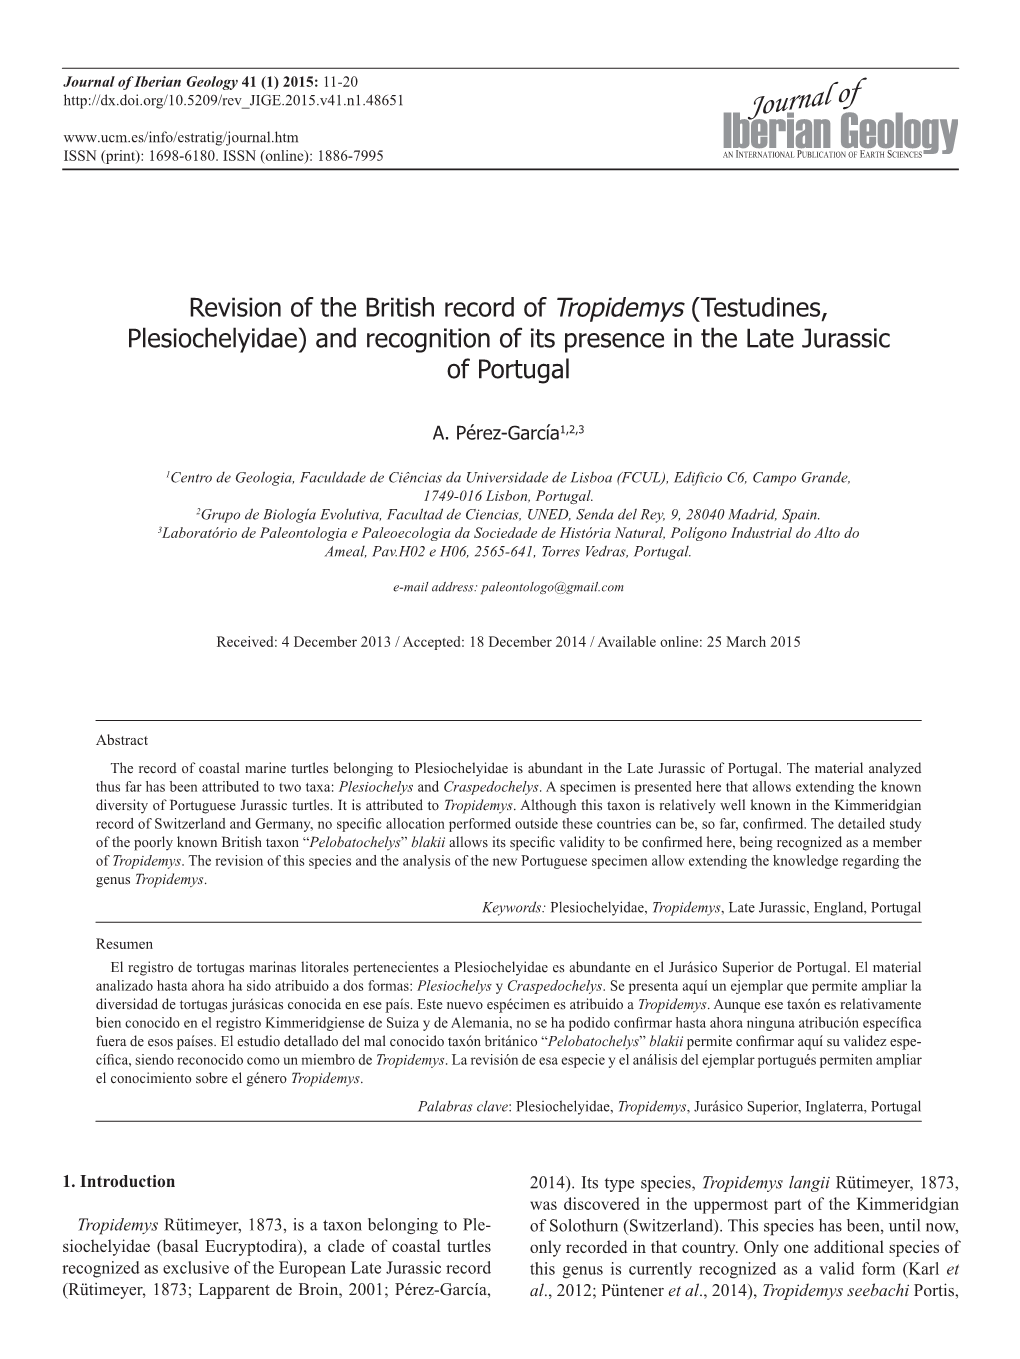 Revision of the British Record of Tropidemys (Testudines, Plesiochelyidae) and Recognition of Its Presence in the Late Jurassic of Portugal